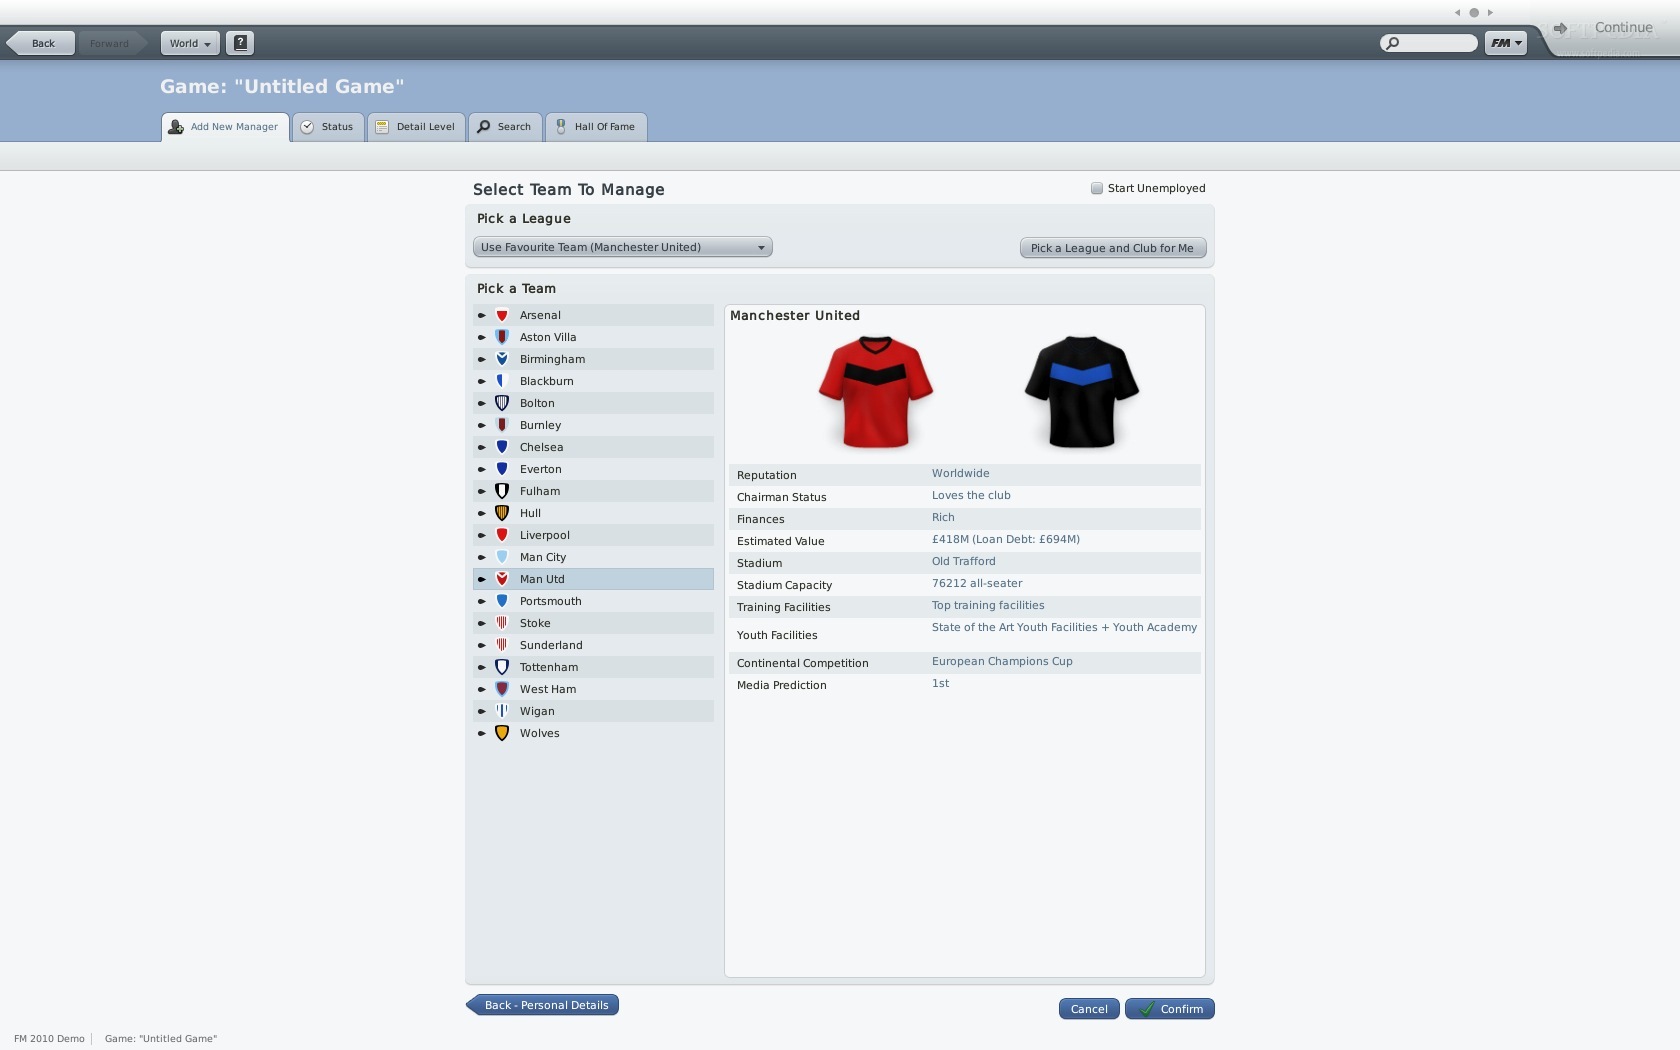 download football manager 2013 windows 10 for free